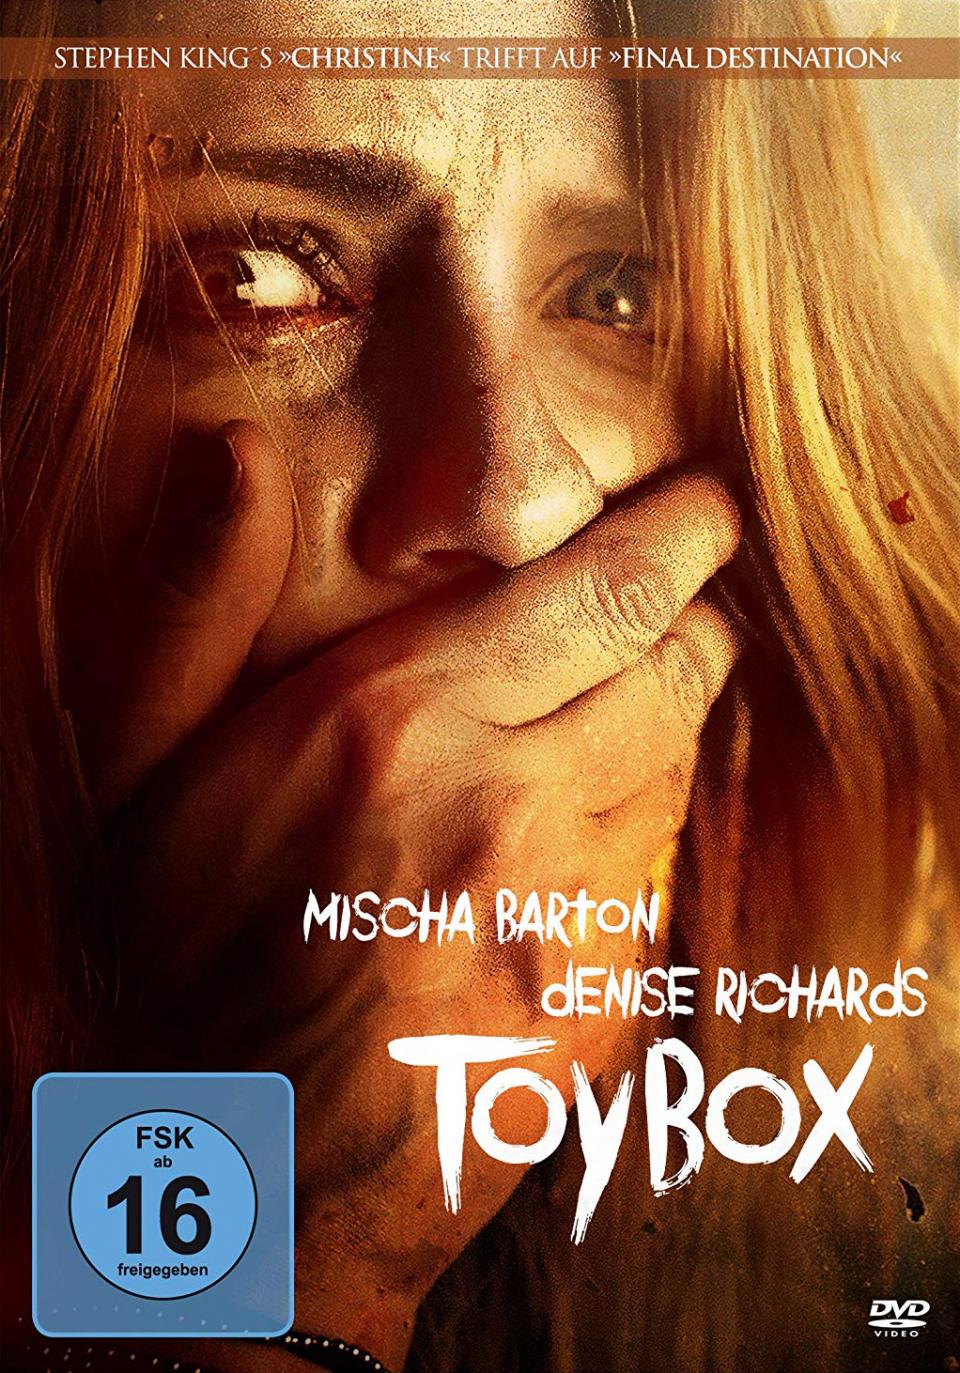 Toybox - DVD Cover